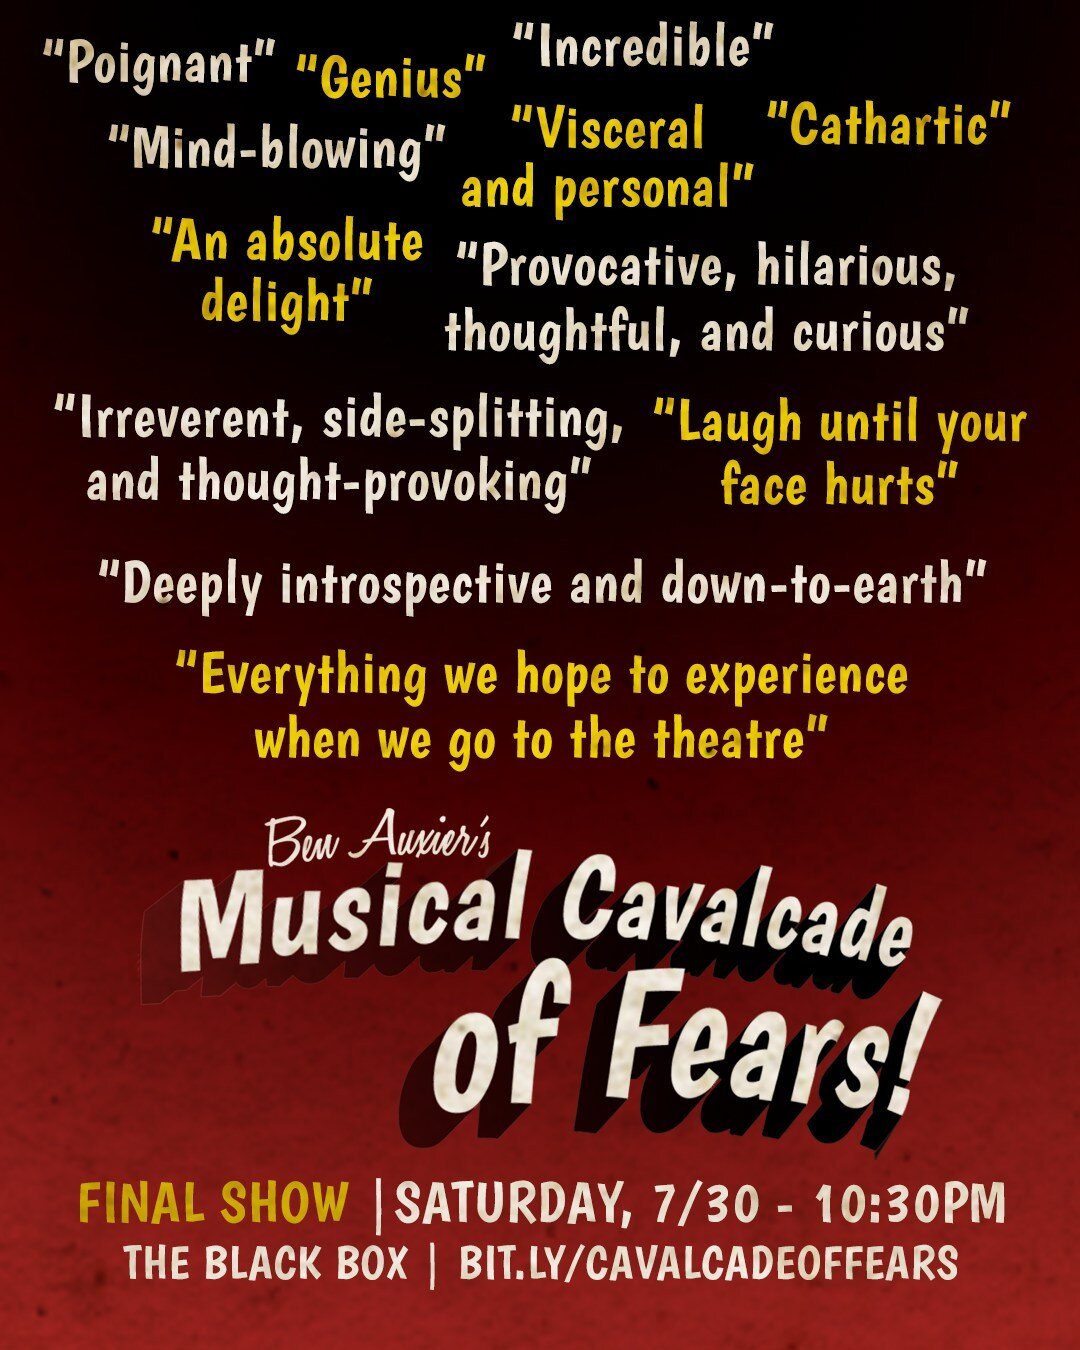 FINAL SHOW TONIGHT⁠
10:30PM, DOORS OPEN AT ABOUT 10:15⁠
(Link to all events in bio)⁠
⁠
Critics and audiences love Ben Auxier's Musical Cavalcade of Fears, and so will you! Unless you miss it! So don't! Because of love! ⁠
⁠
Presented by @thelivingroom